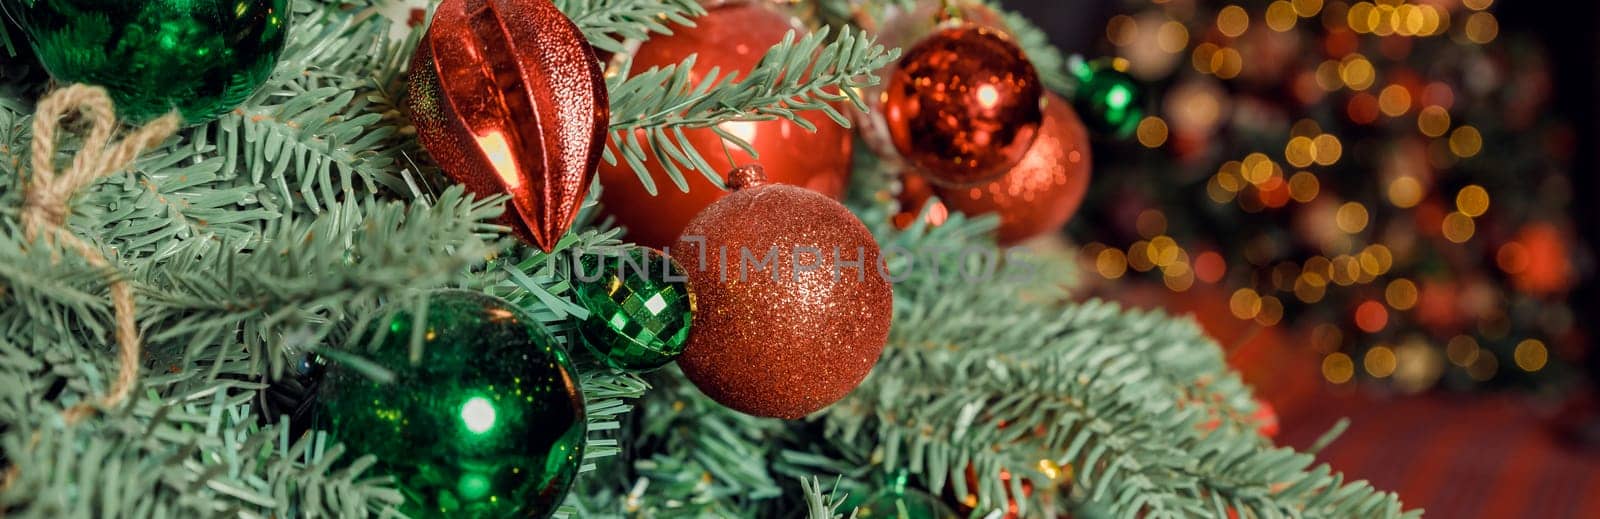 Christmas decorations on the holiday tree.Many colorful balls garland glowing lamps and red berries on the branches are sprinkled with snow.Festive traditional seamless background for the New Year by YuliaYaspe1979